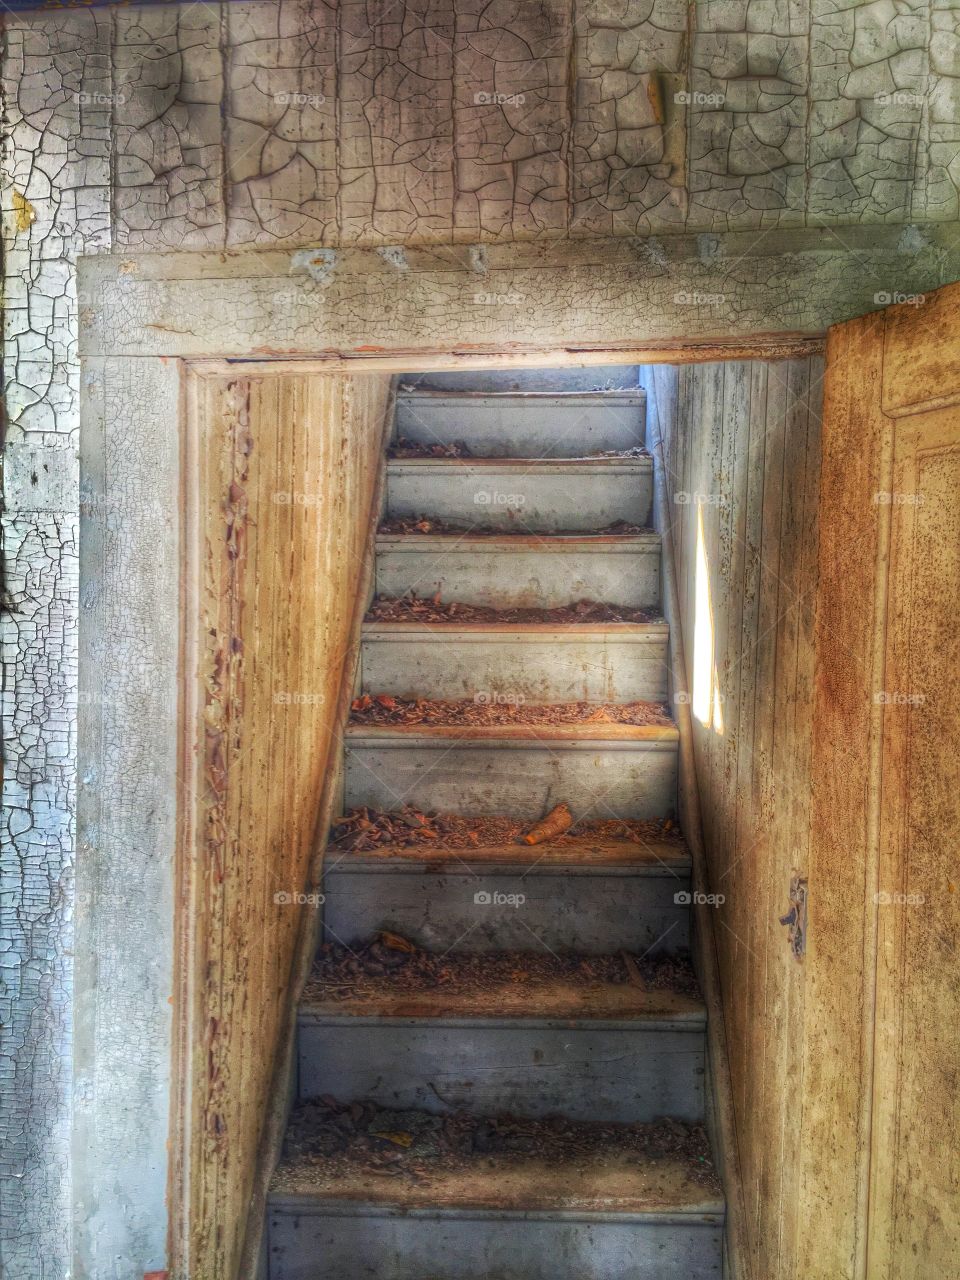 Stairway to death. A stairway that has not been touched since 1978